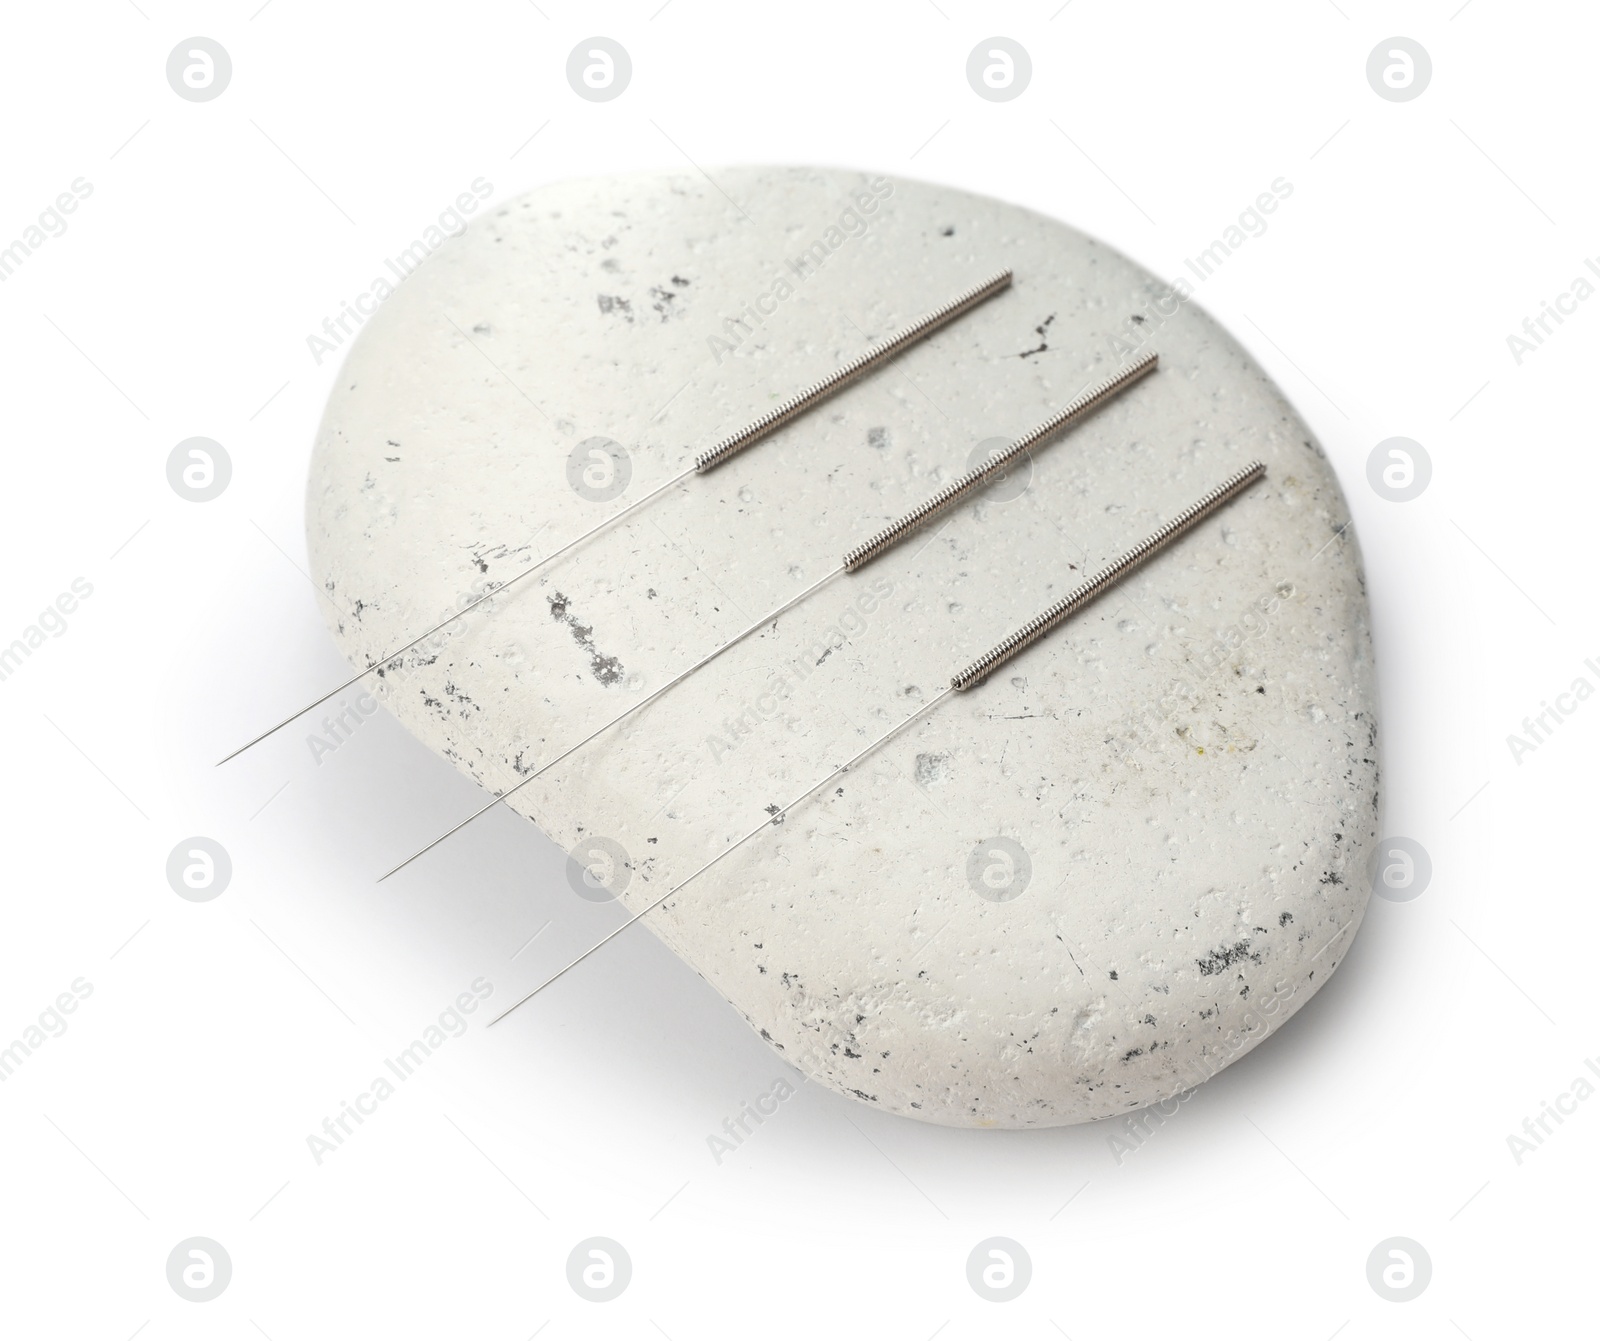 Photo of Needles for acupuncture and stone on white background